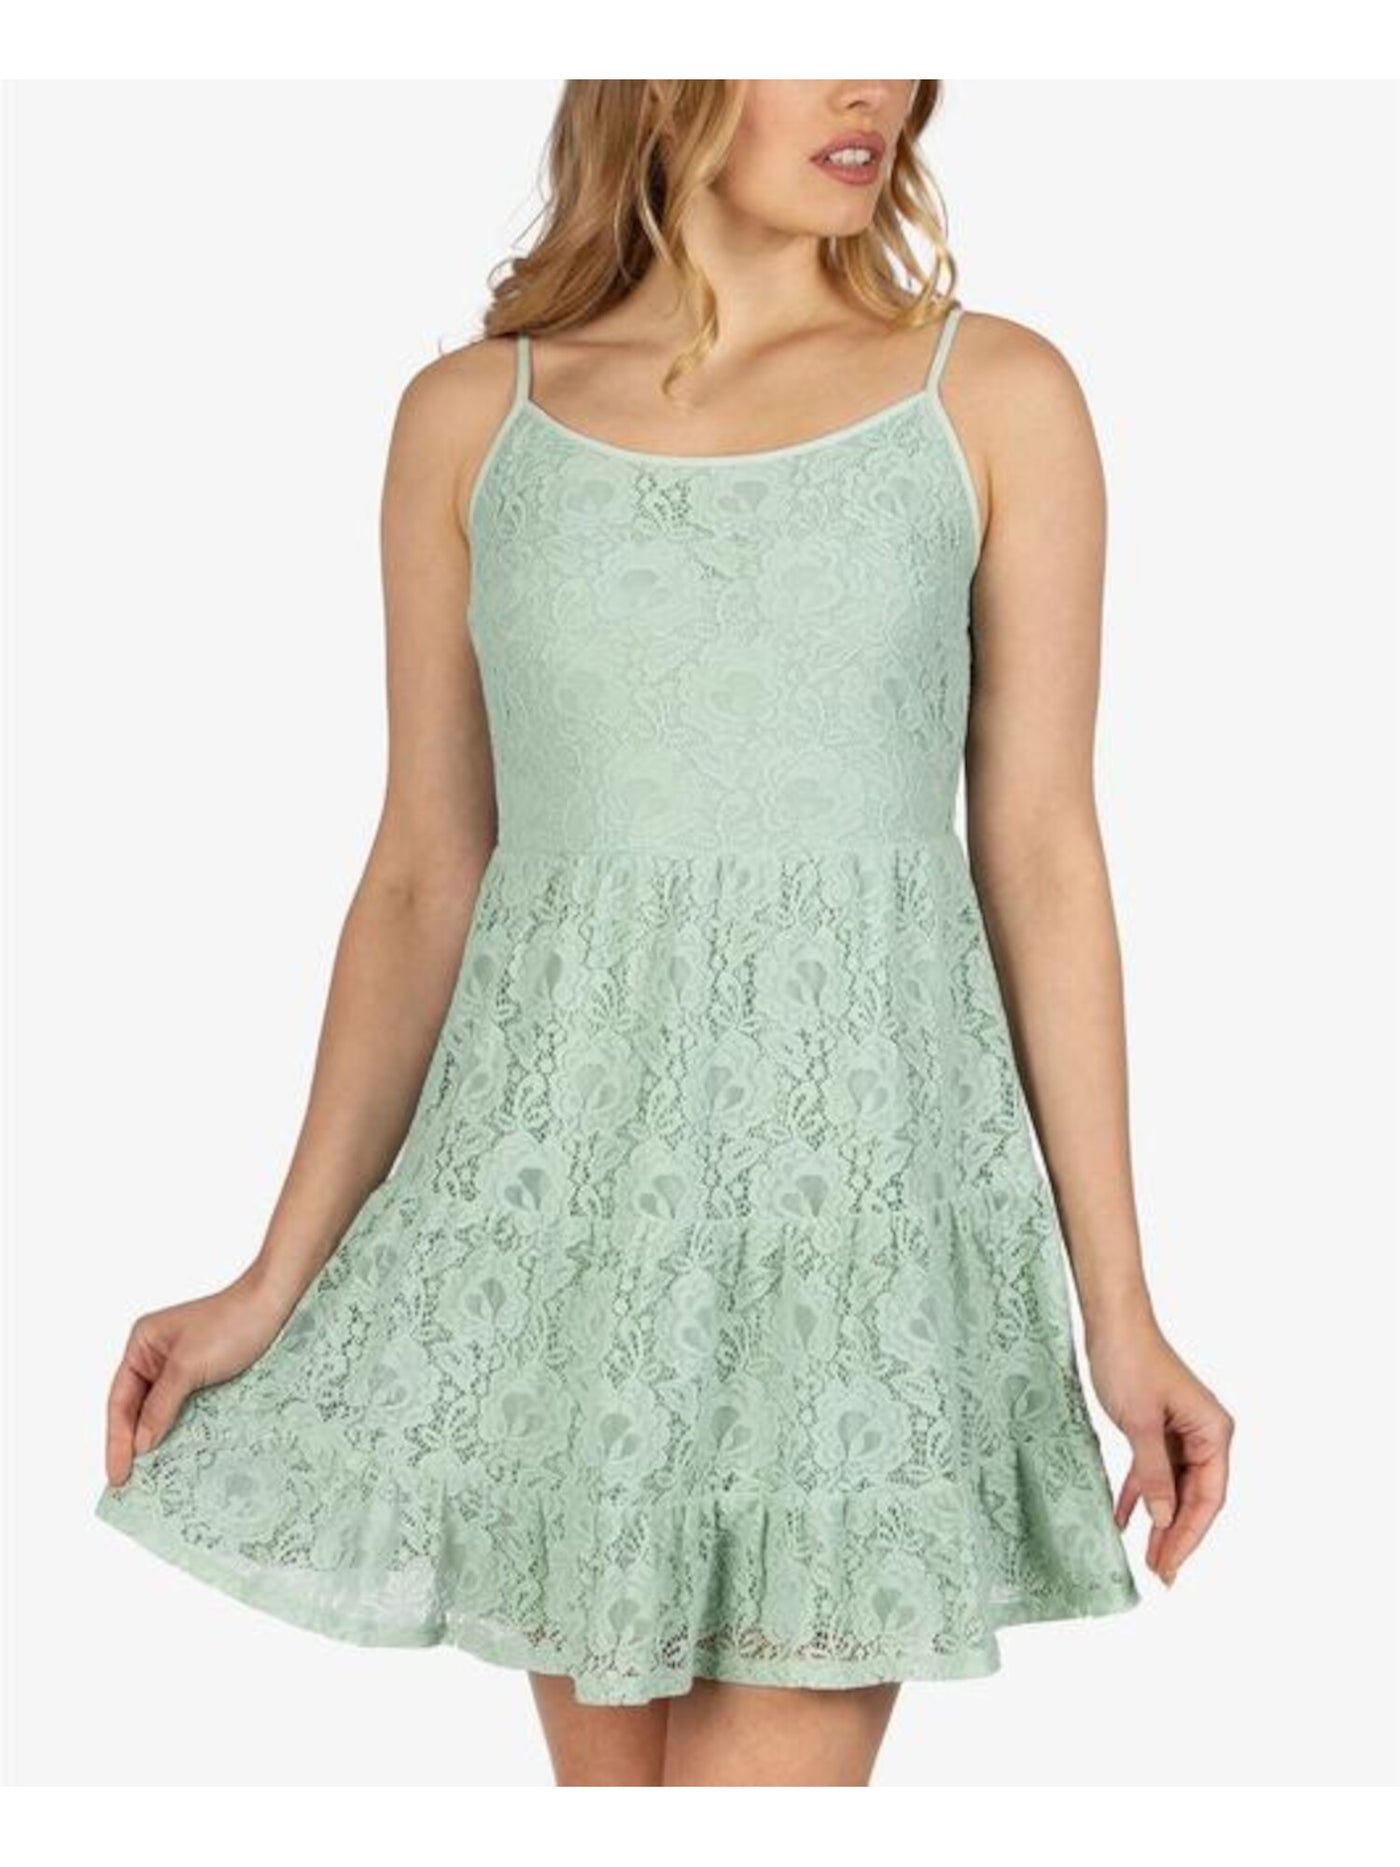 SPEECHLESS Womens Green Stretch Lace Tiered Floral Spaghetti Strap Scoop Neck Short Baby Doll Dress Juniors XL